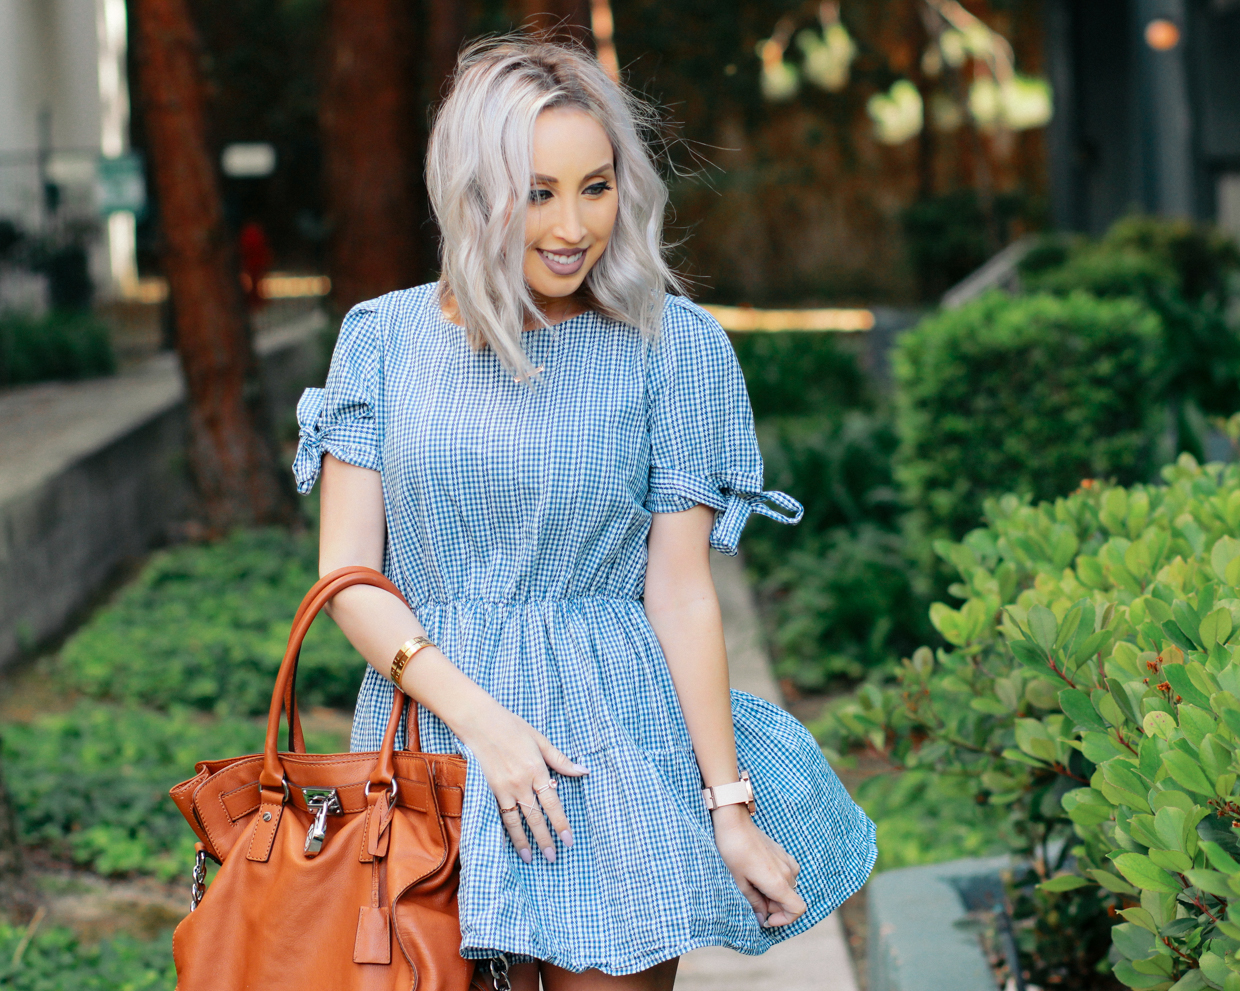 Blondie in the City | Plaid Dress, Camel Michael Kors Bag, Pale Pink Louboutin's